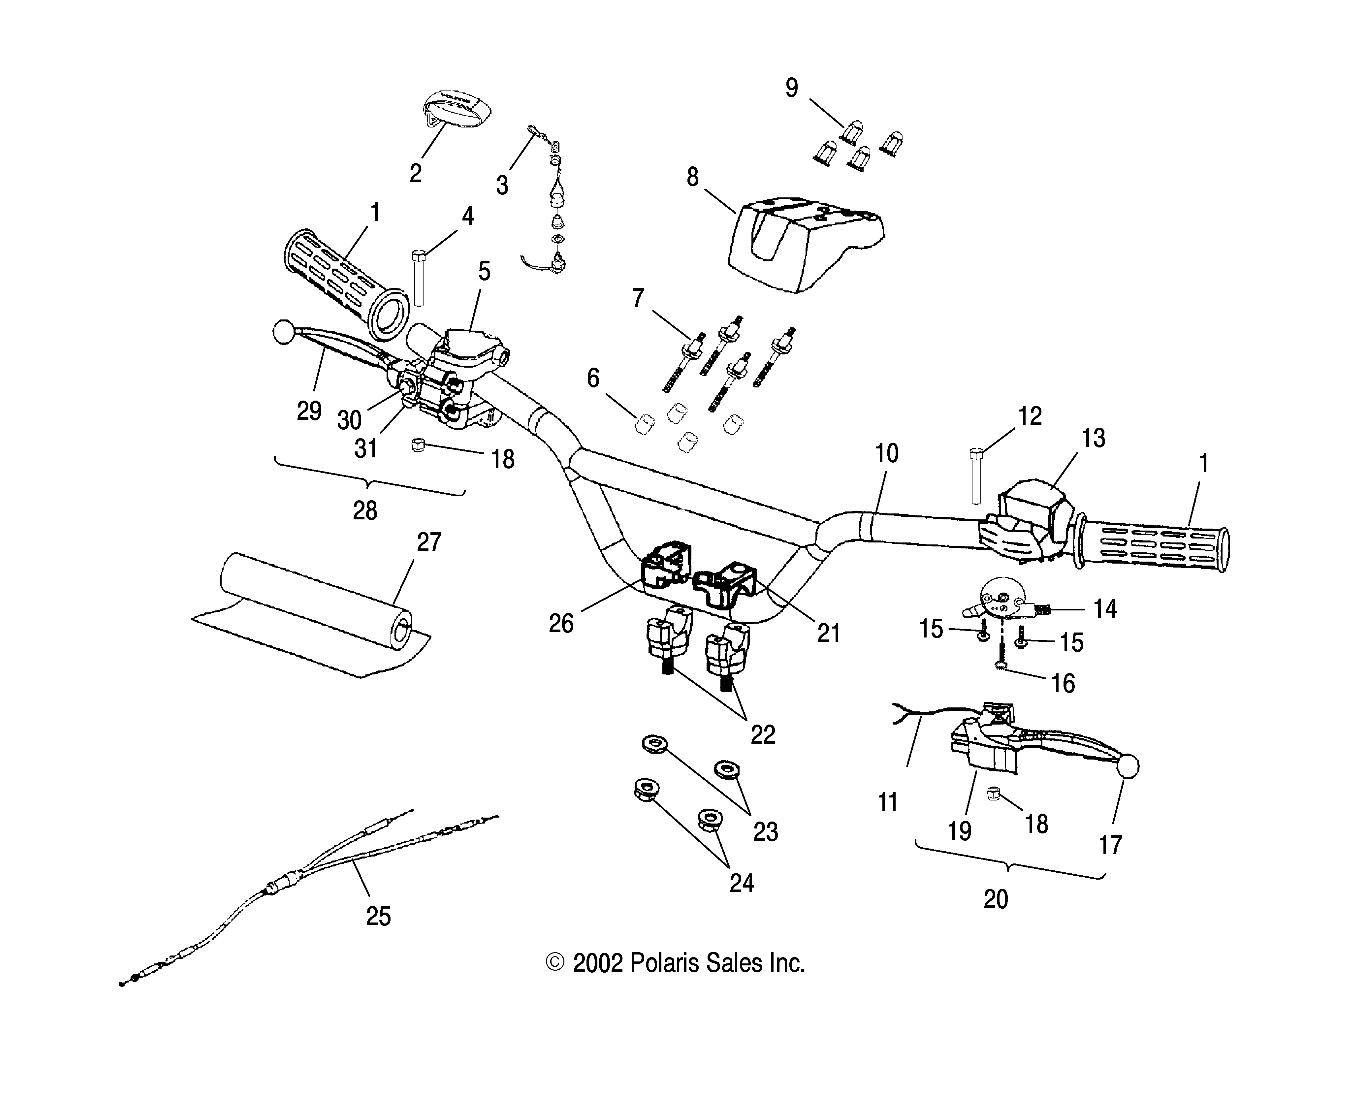 Part Number : 0451037 MANUAL CHOKE ASSEMBLY